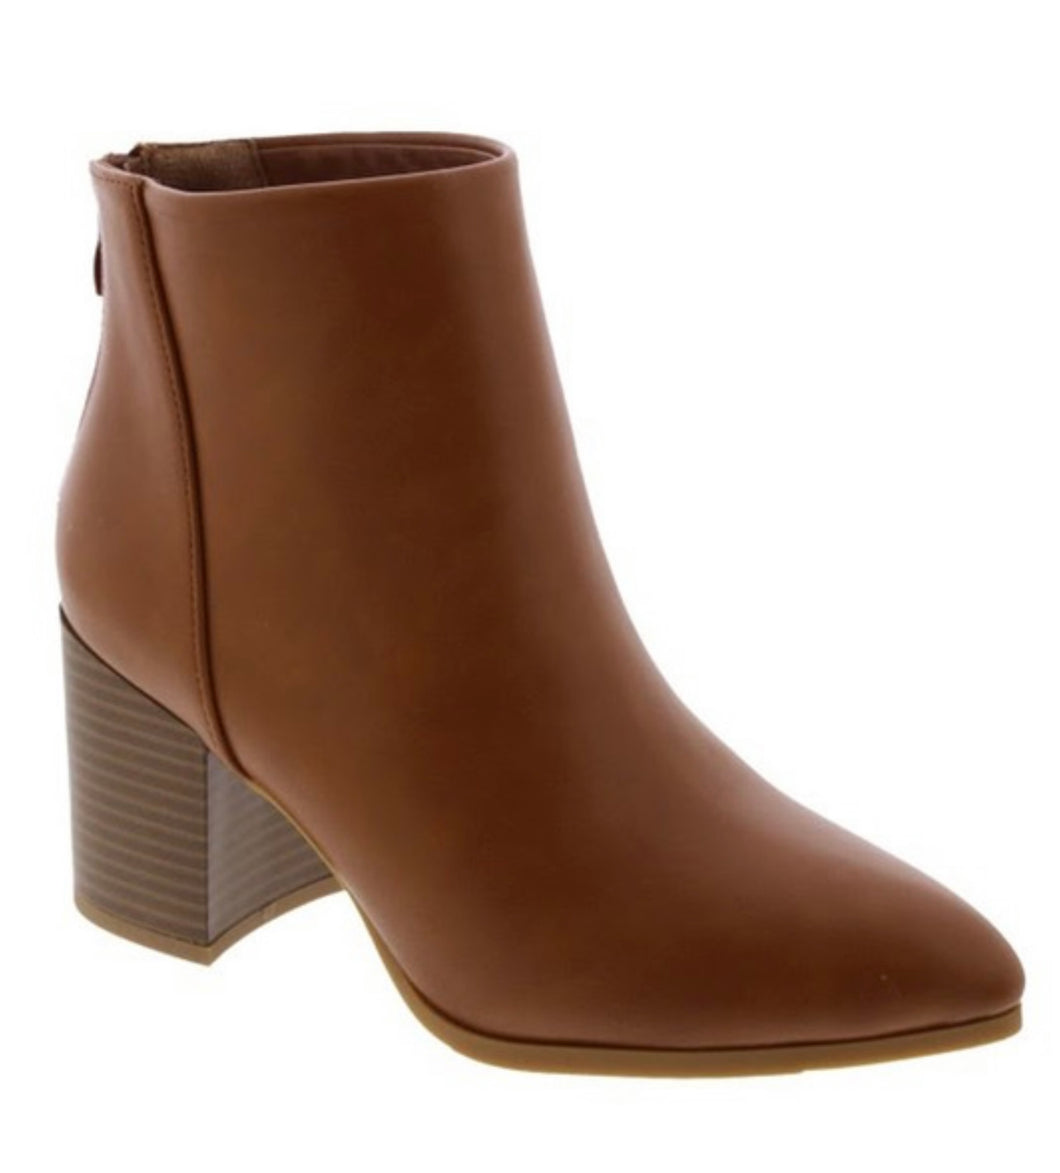 Tan Ankle Boots with Zipper